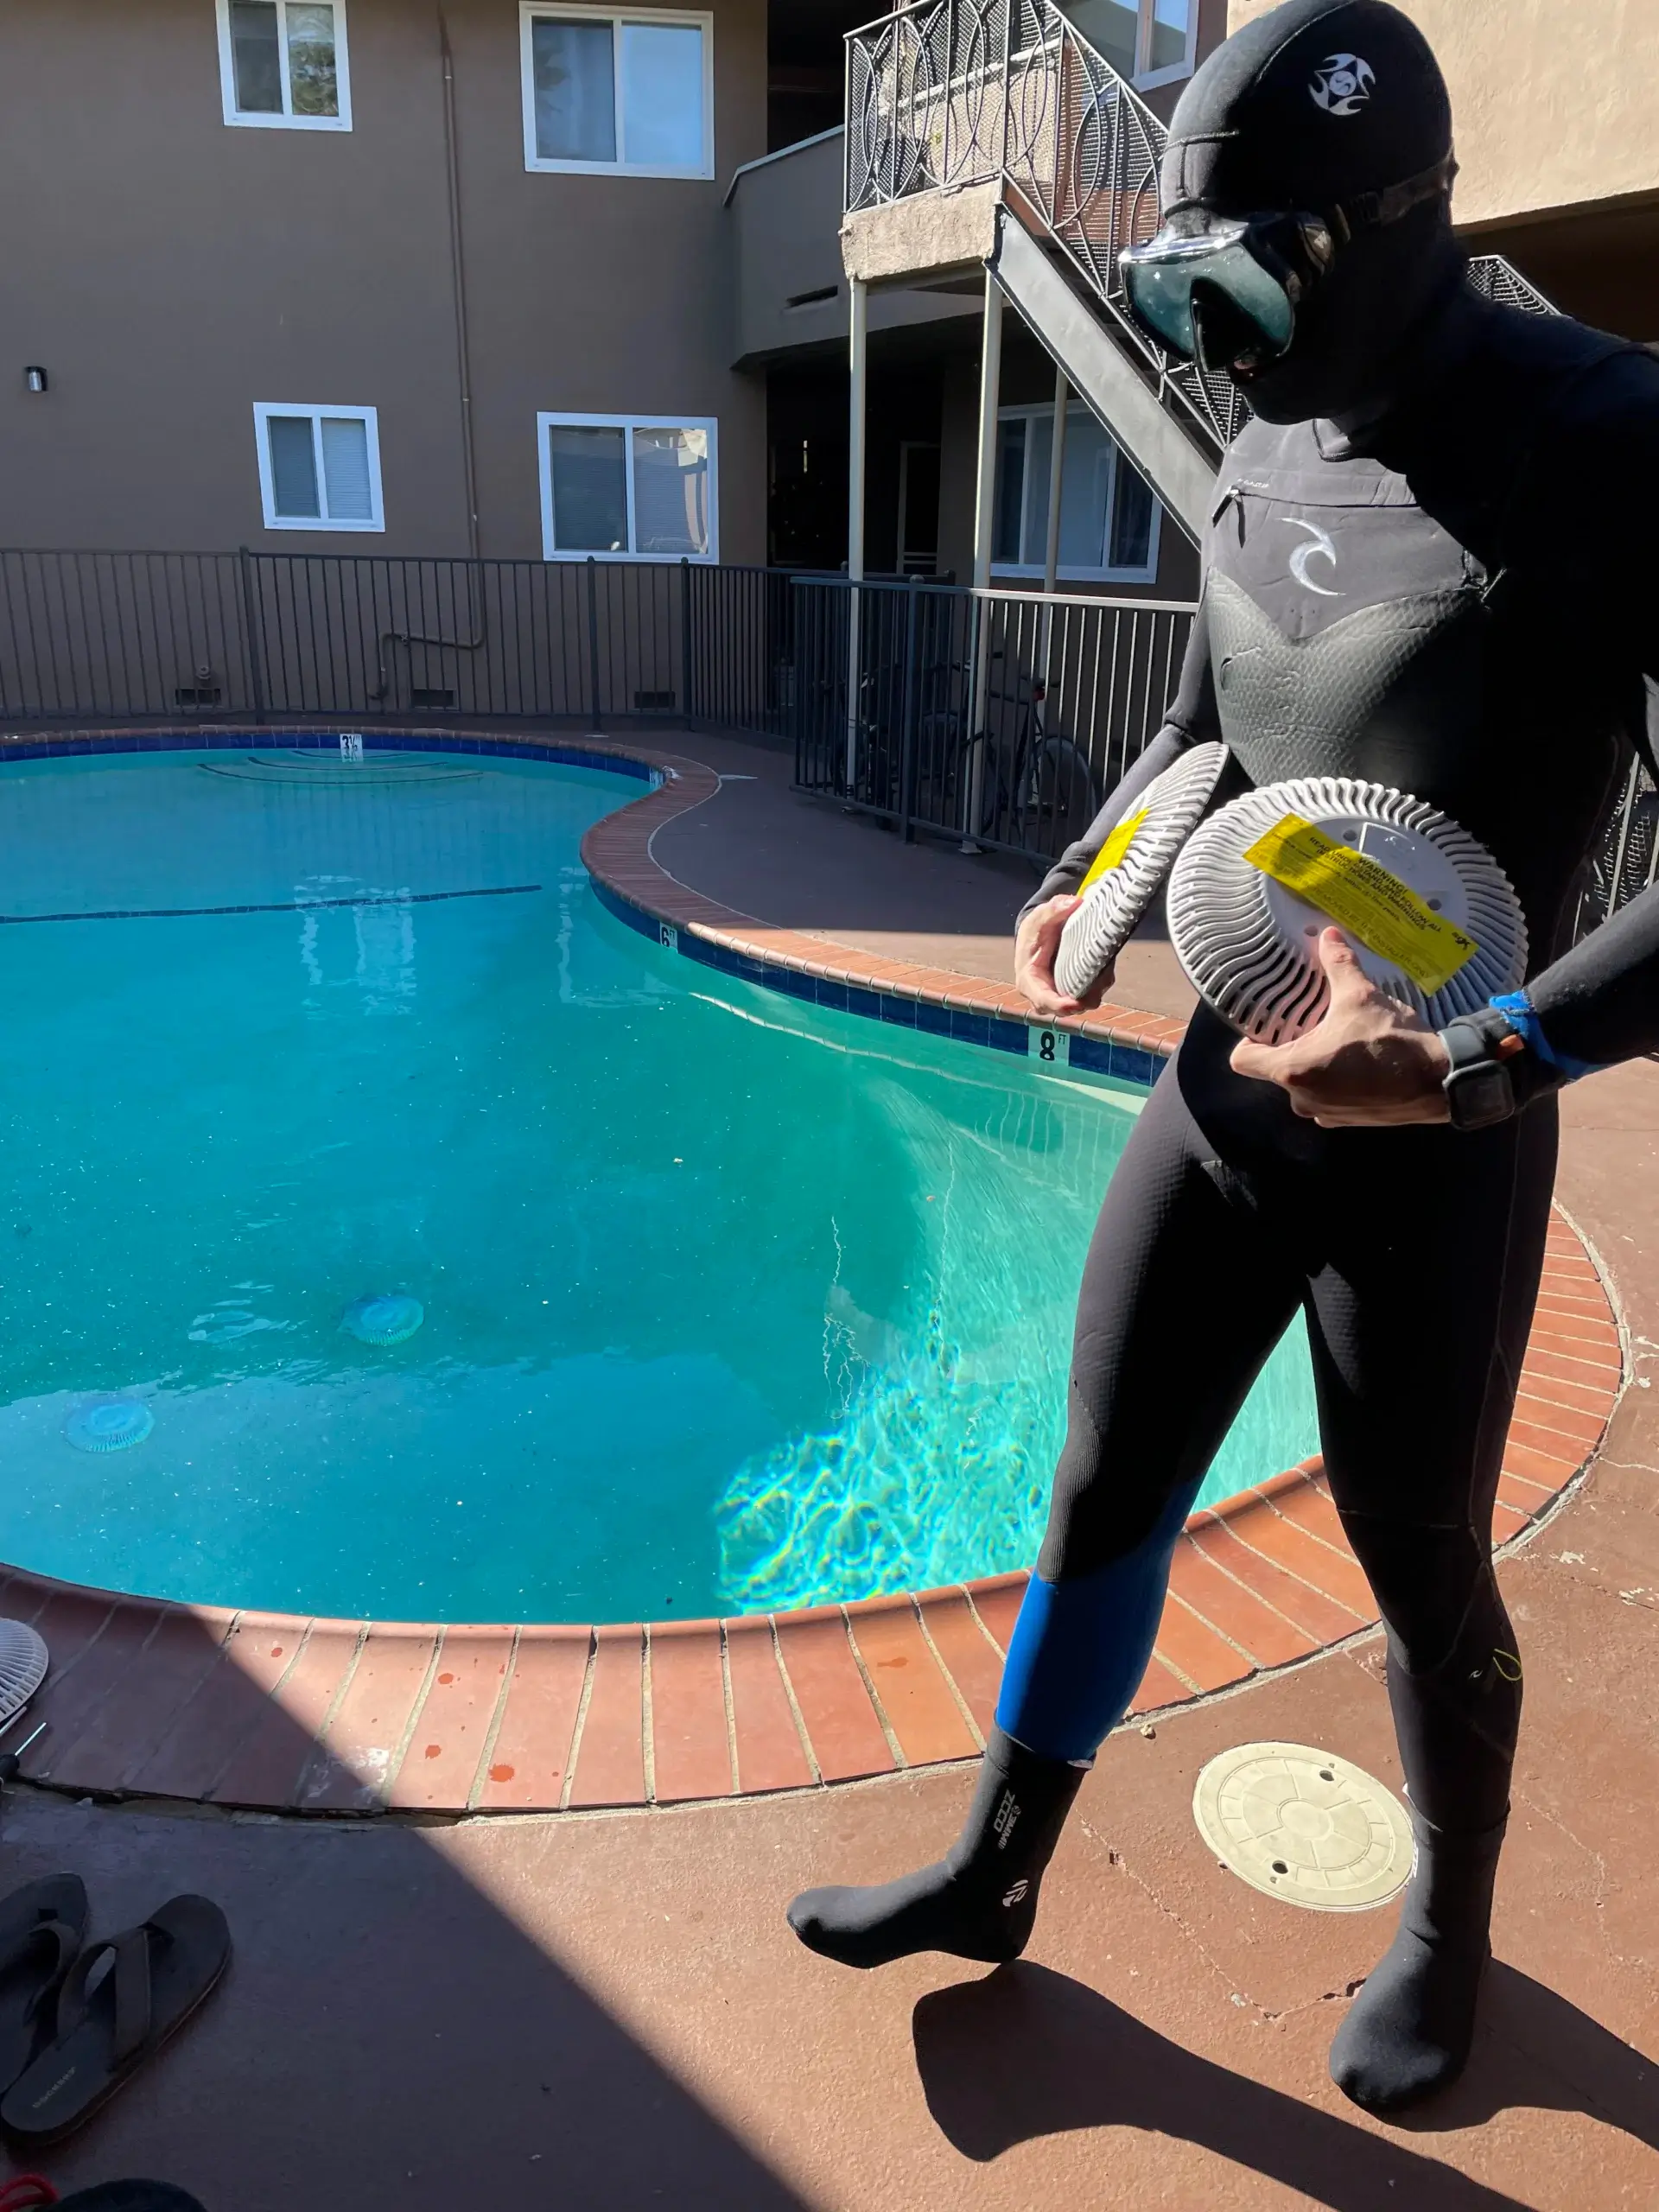 A man in a wetsuit standing next to a pool.